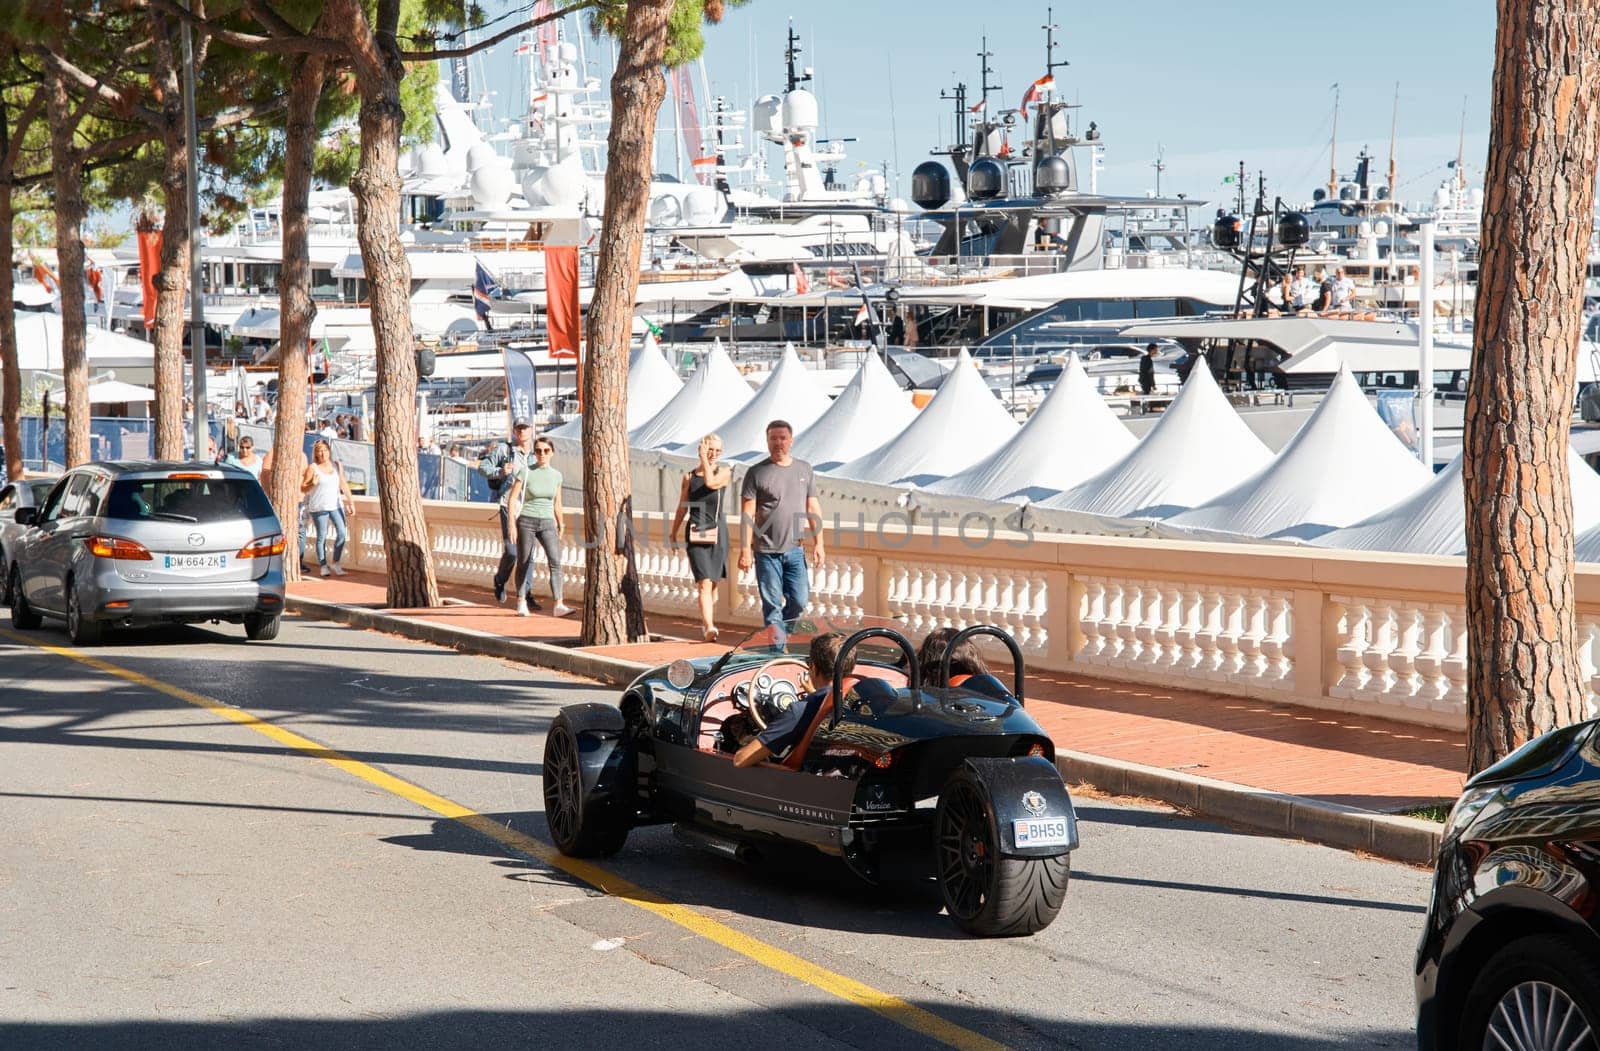 Monaco, Monte Carlo, 28 September 2022 - Exclusive car on the famous motorboat exhibition in the principality, the most expensive boats for the richest people around the world, yacht brokers. High quality photo